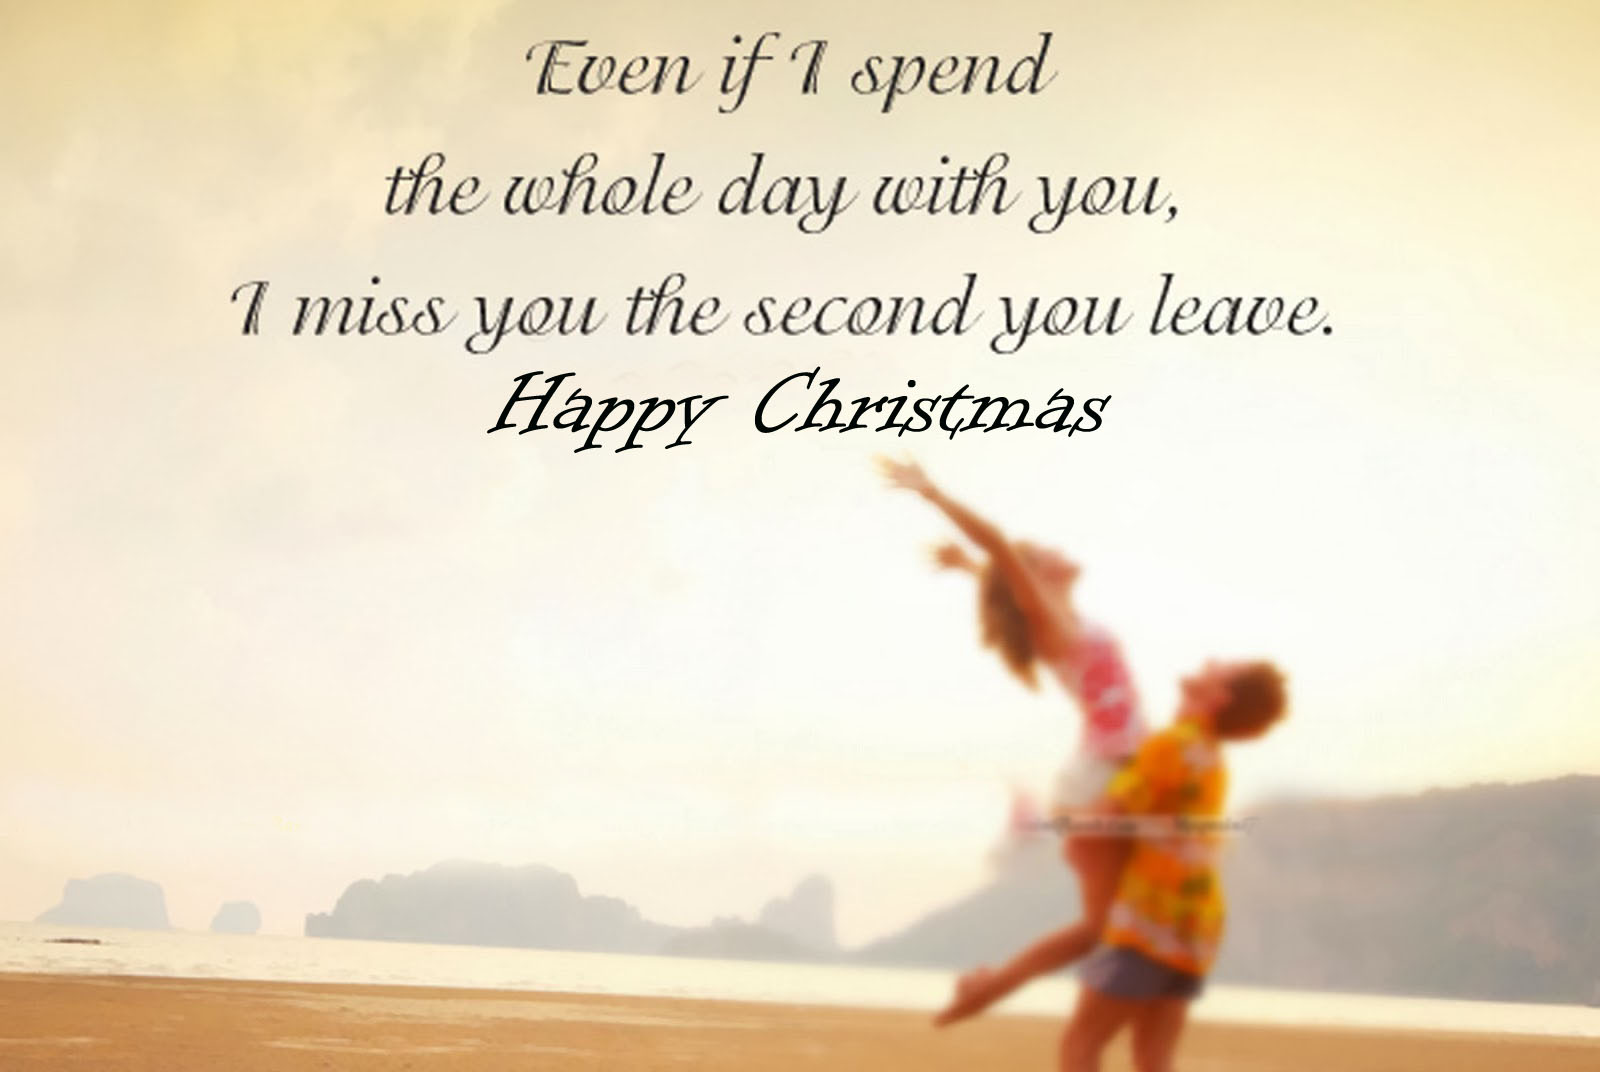 Christmas Quotes For Girlfriend Christmas text messages christmaswishes